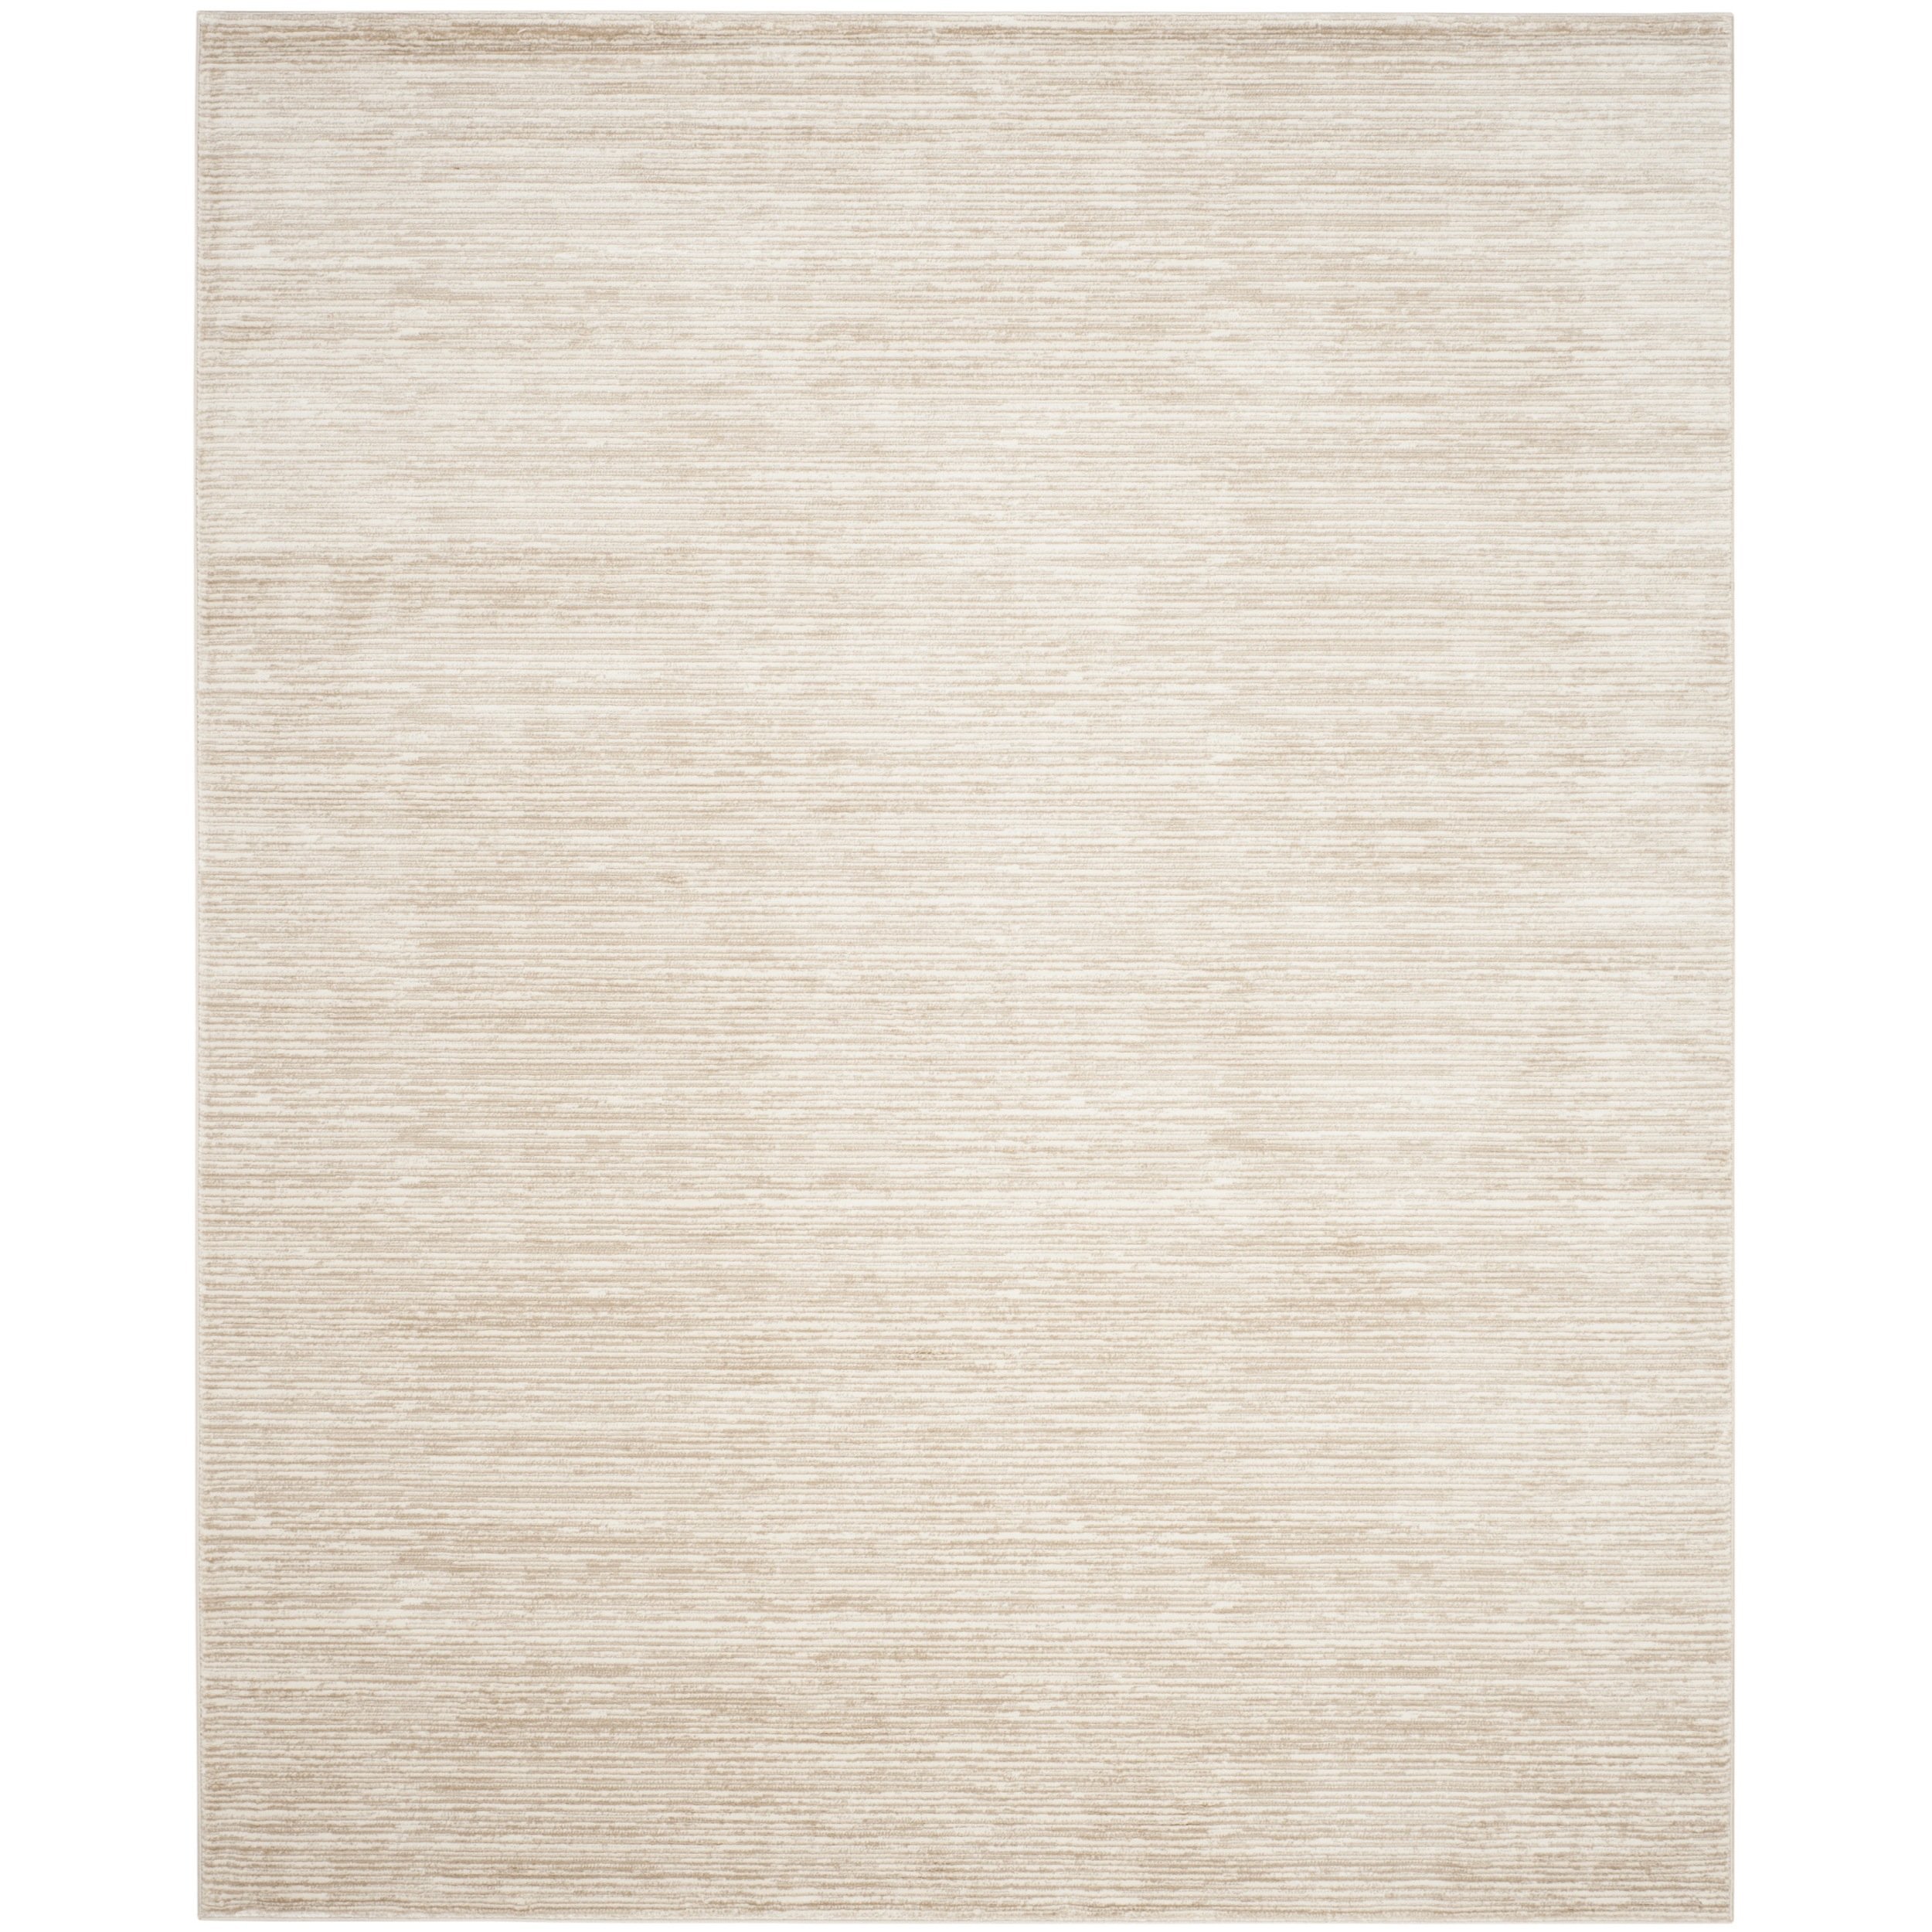 SAFAVIEH Vision Collection 8' x 10' Cream VSN606F Modern Ombre Tonal Chic Non-Shedding Living Room Bedroom Dining Home Office Area Rug